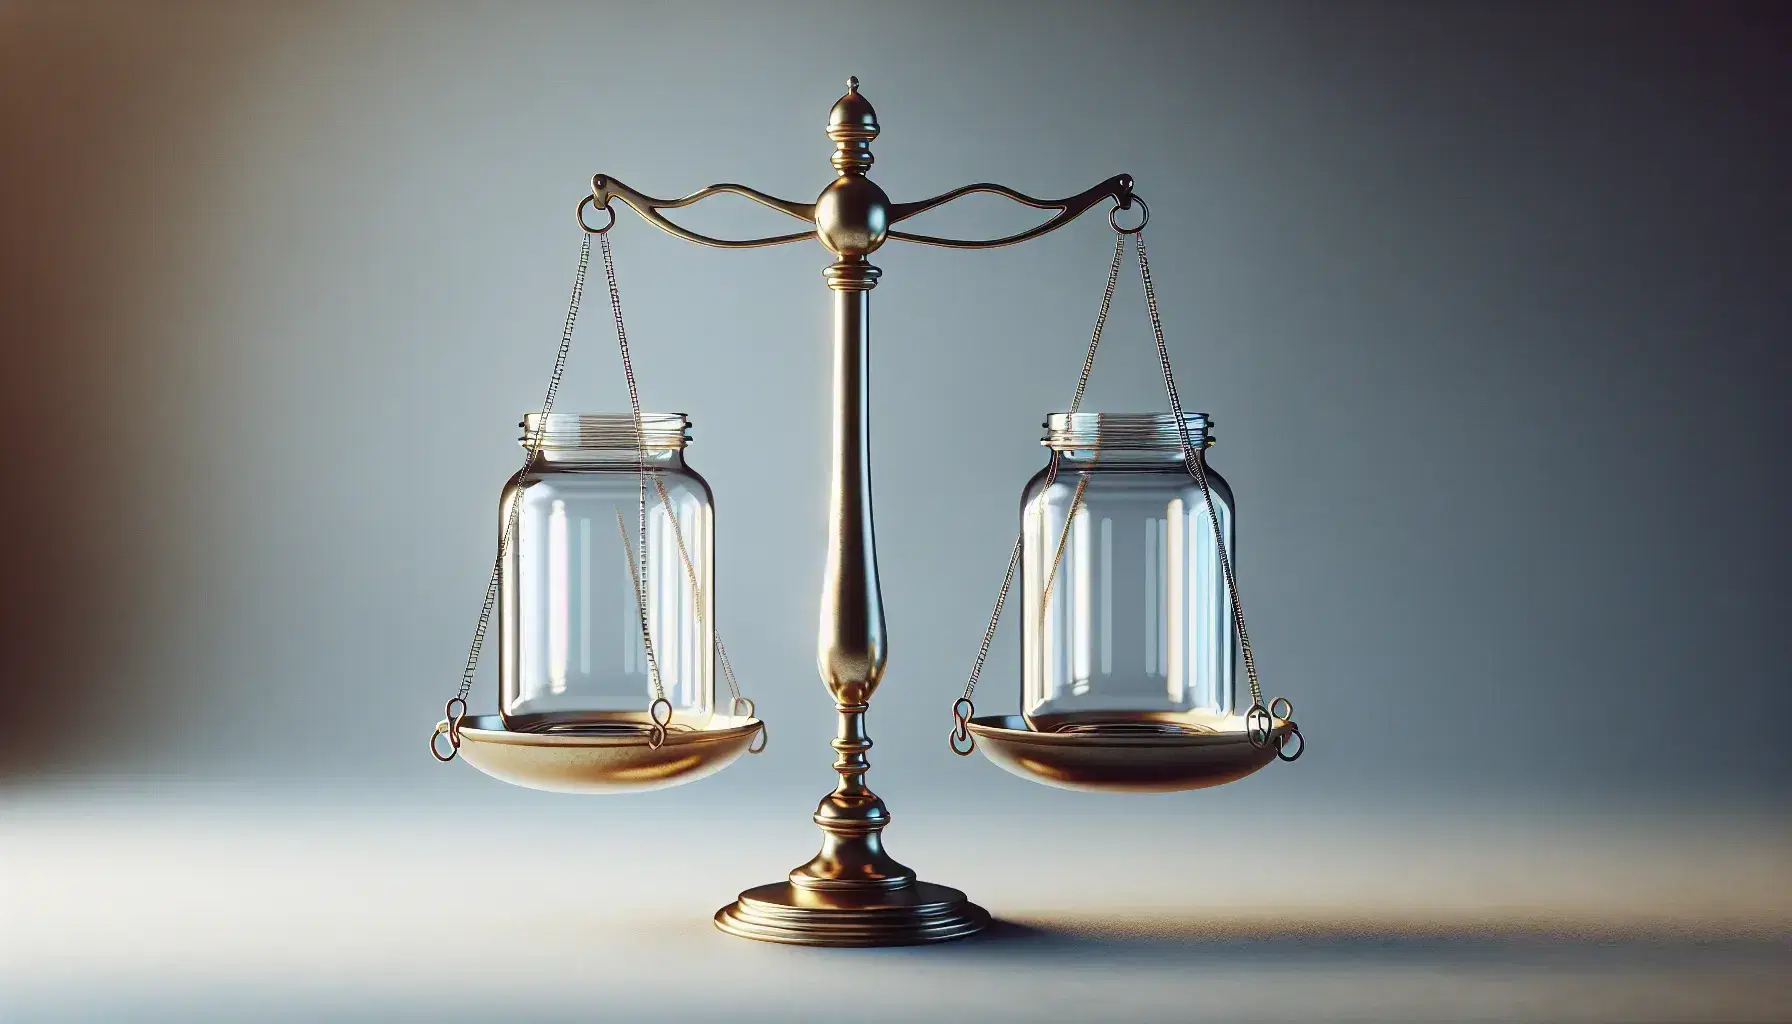 Balanced golden justice scale with two identical empty glass jars suspended on hooks against a light gray background, symbolizing equality and fairness.